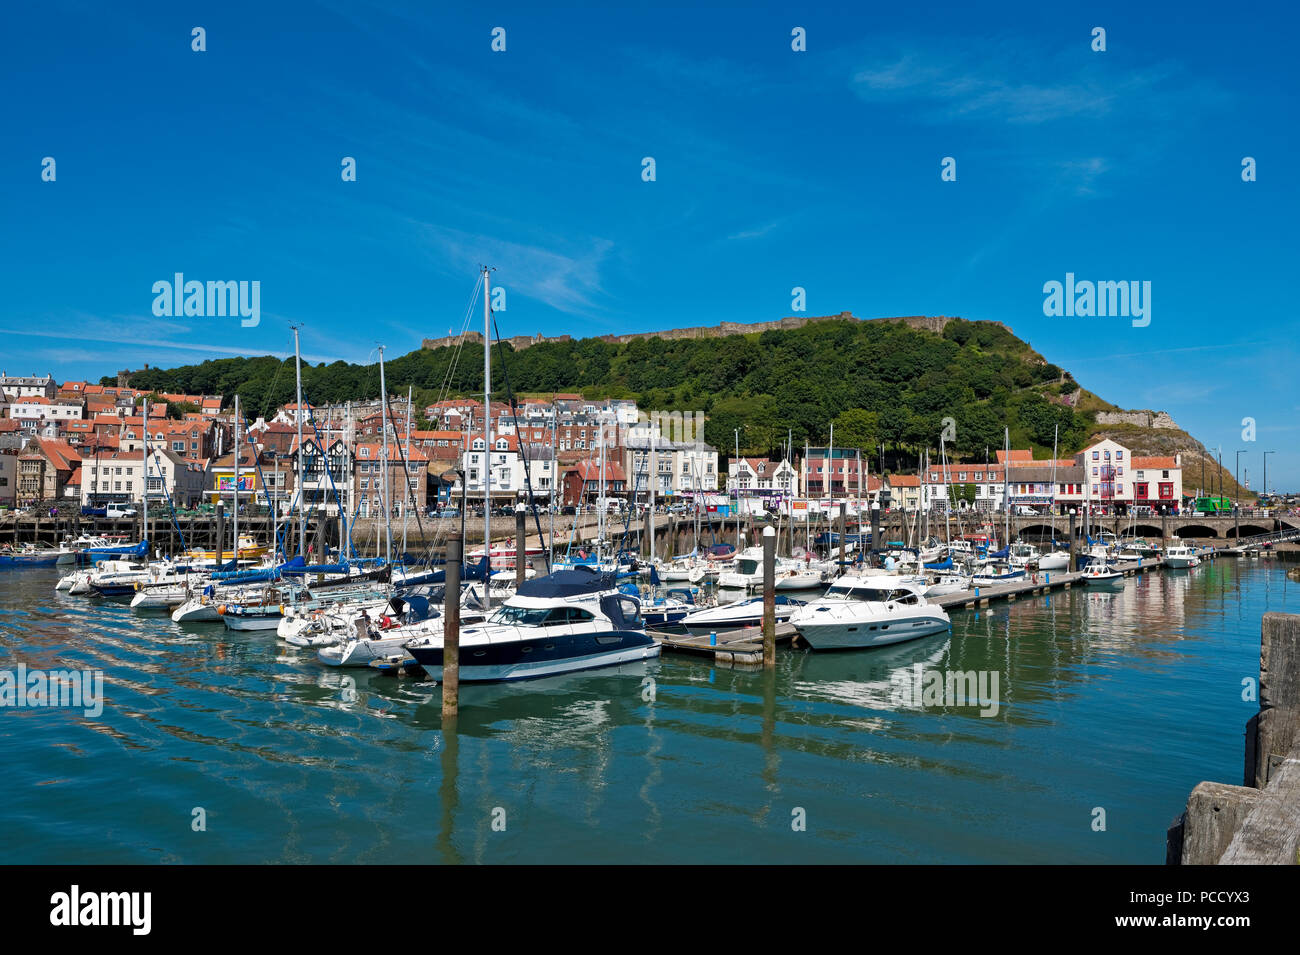 Boats moored in the harbour harbor marina in summer Scarborough North Yorkshire England UK United Kingdom GB Great Britain Stock Photo